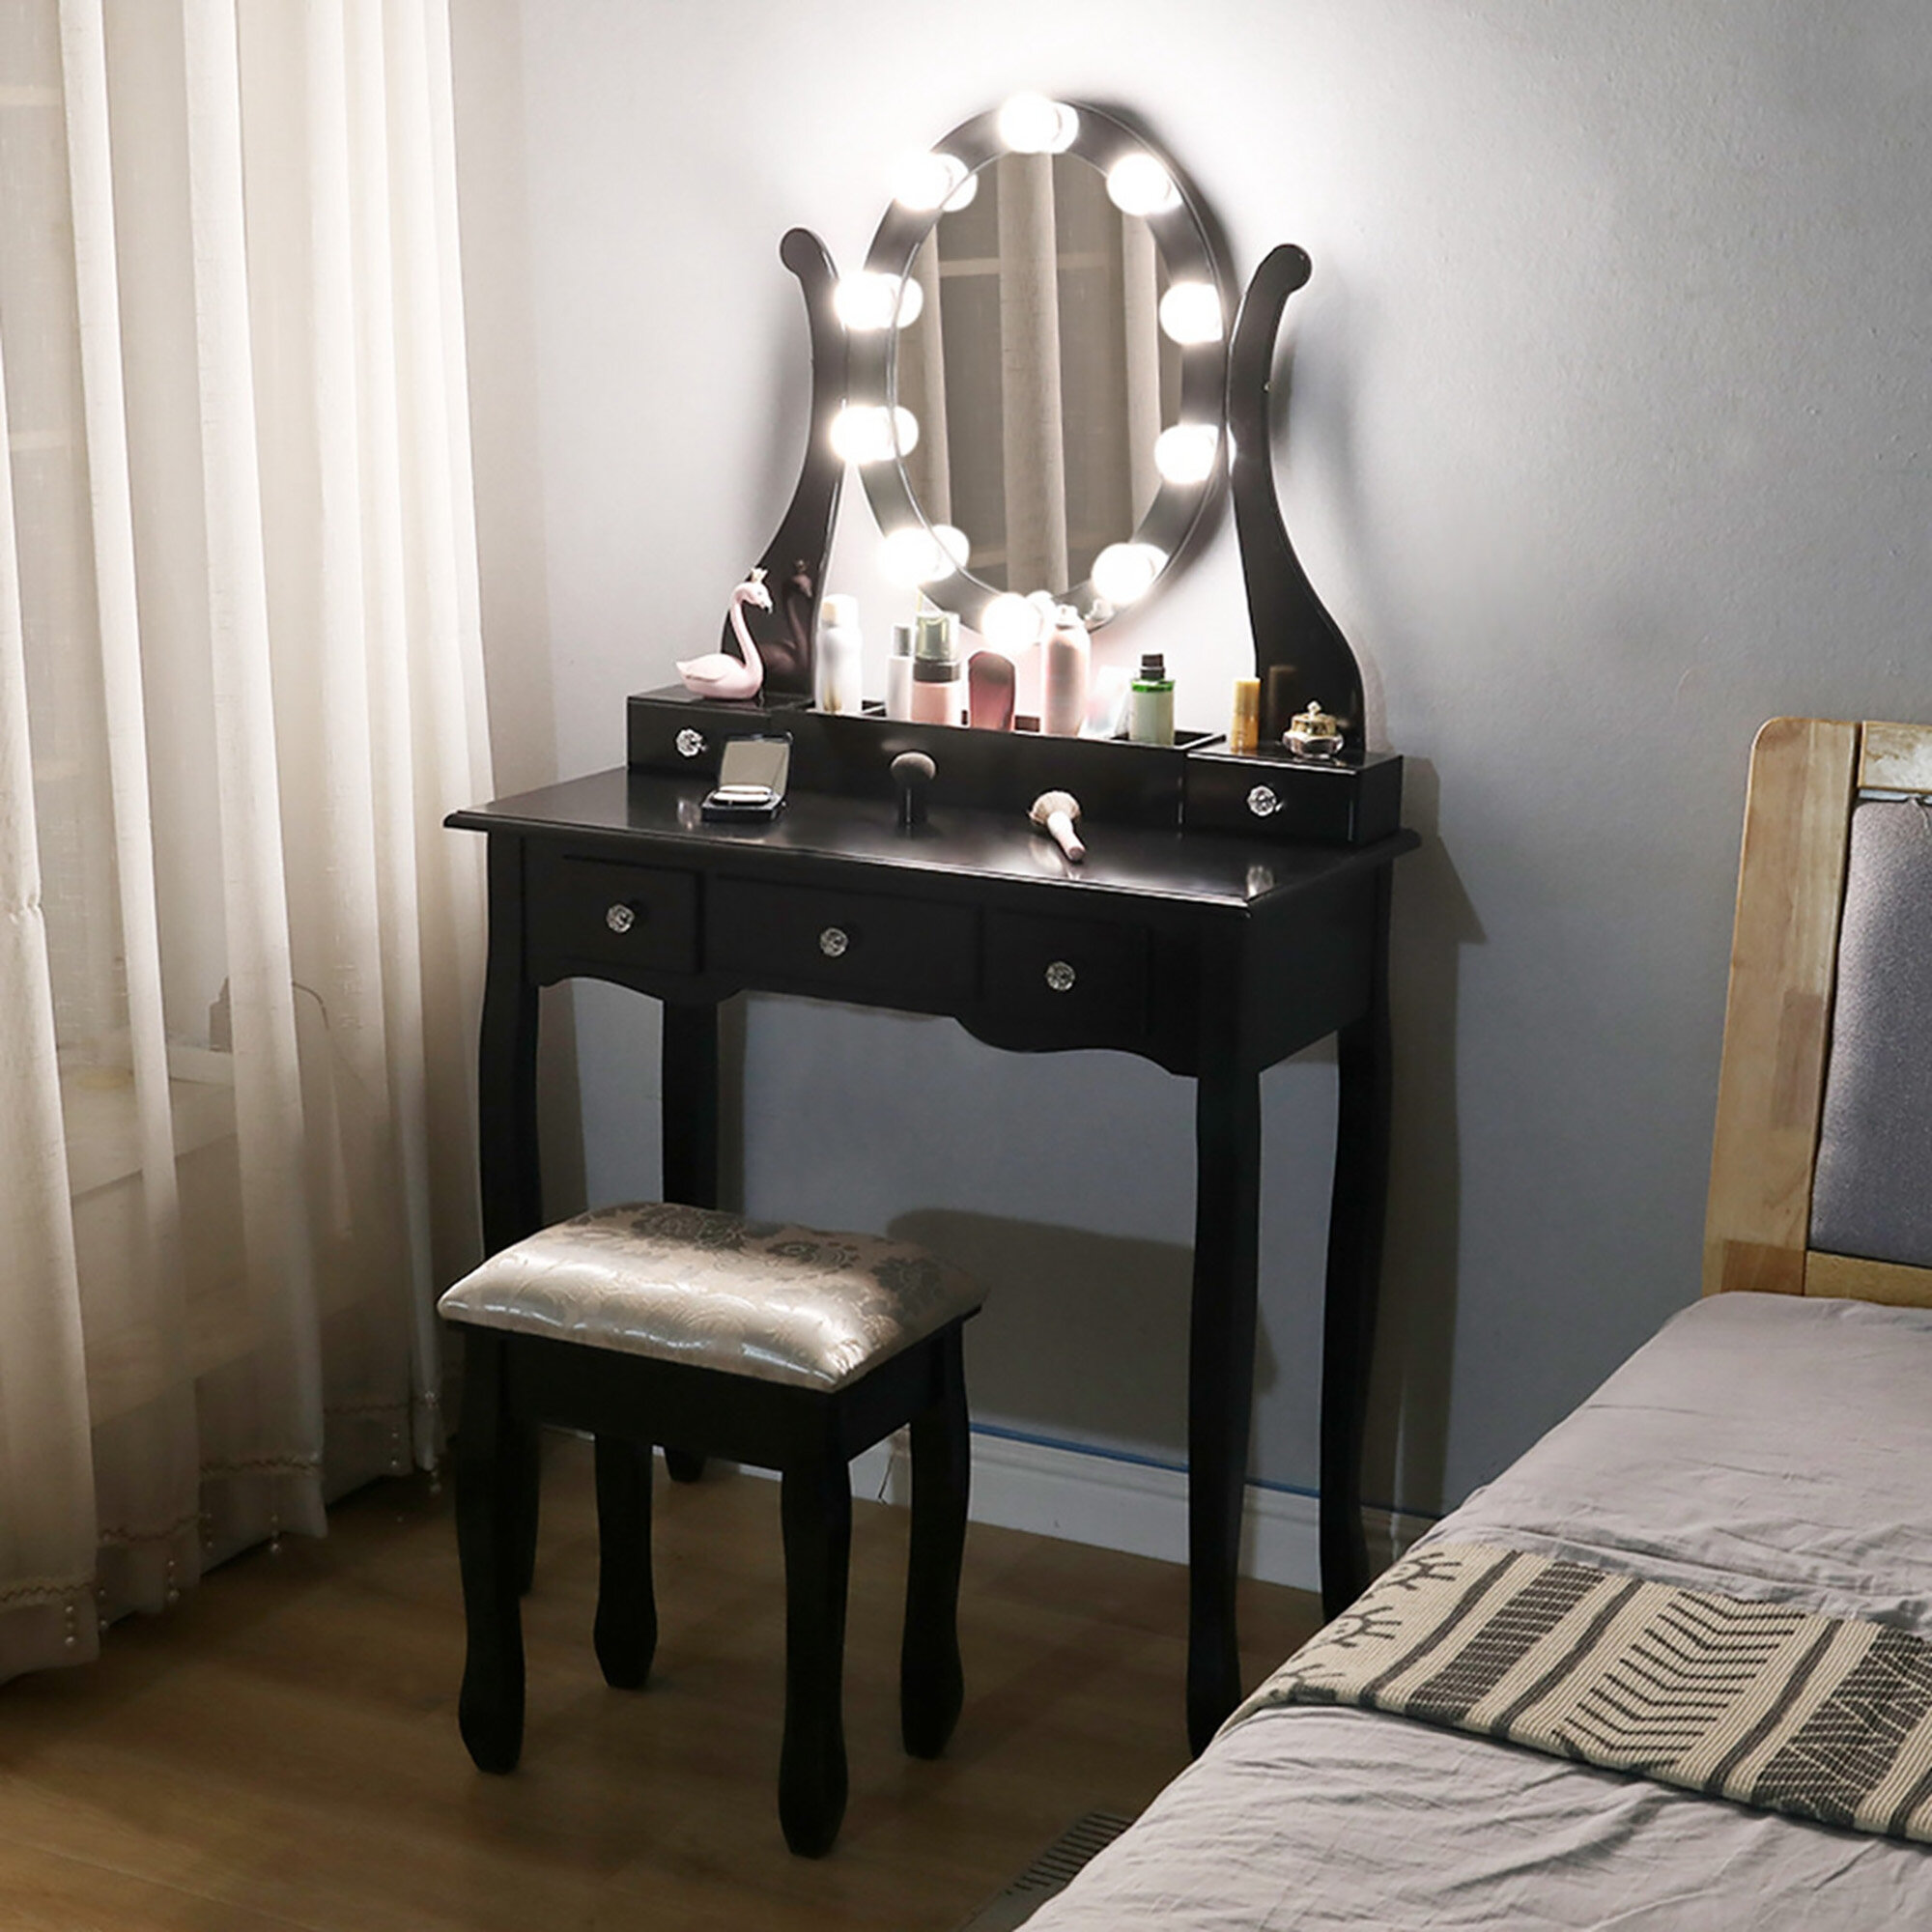 Details about   Vanity Set With Touch Screen Dimming Mirror Dressing Table Vanity Makeup Table 